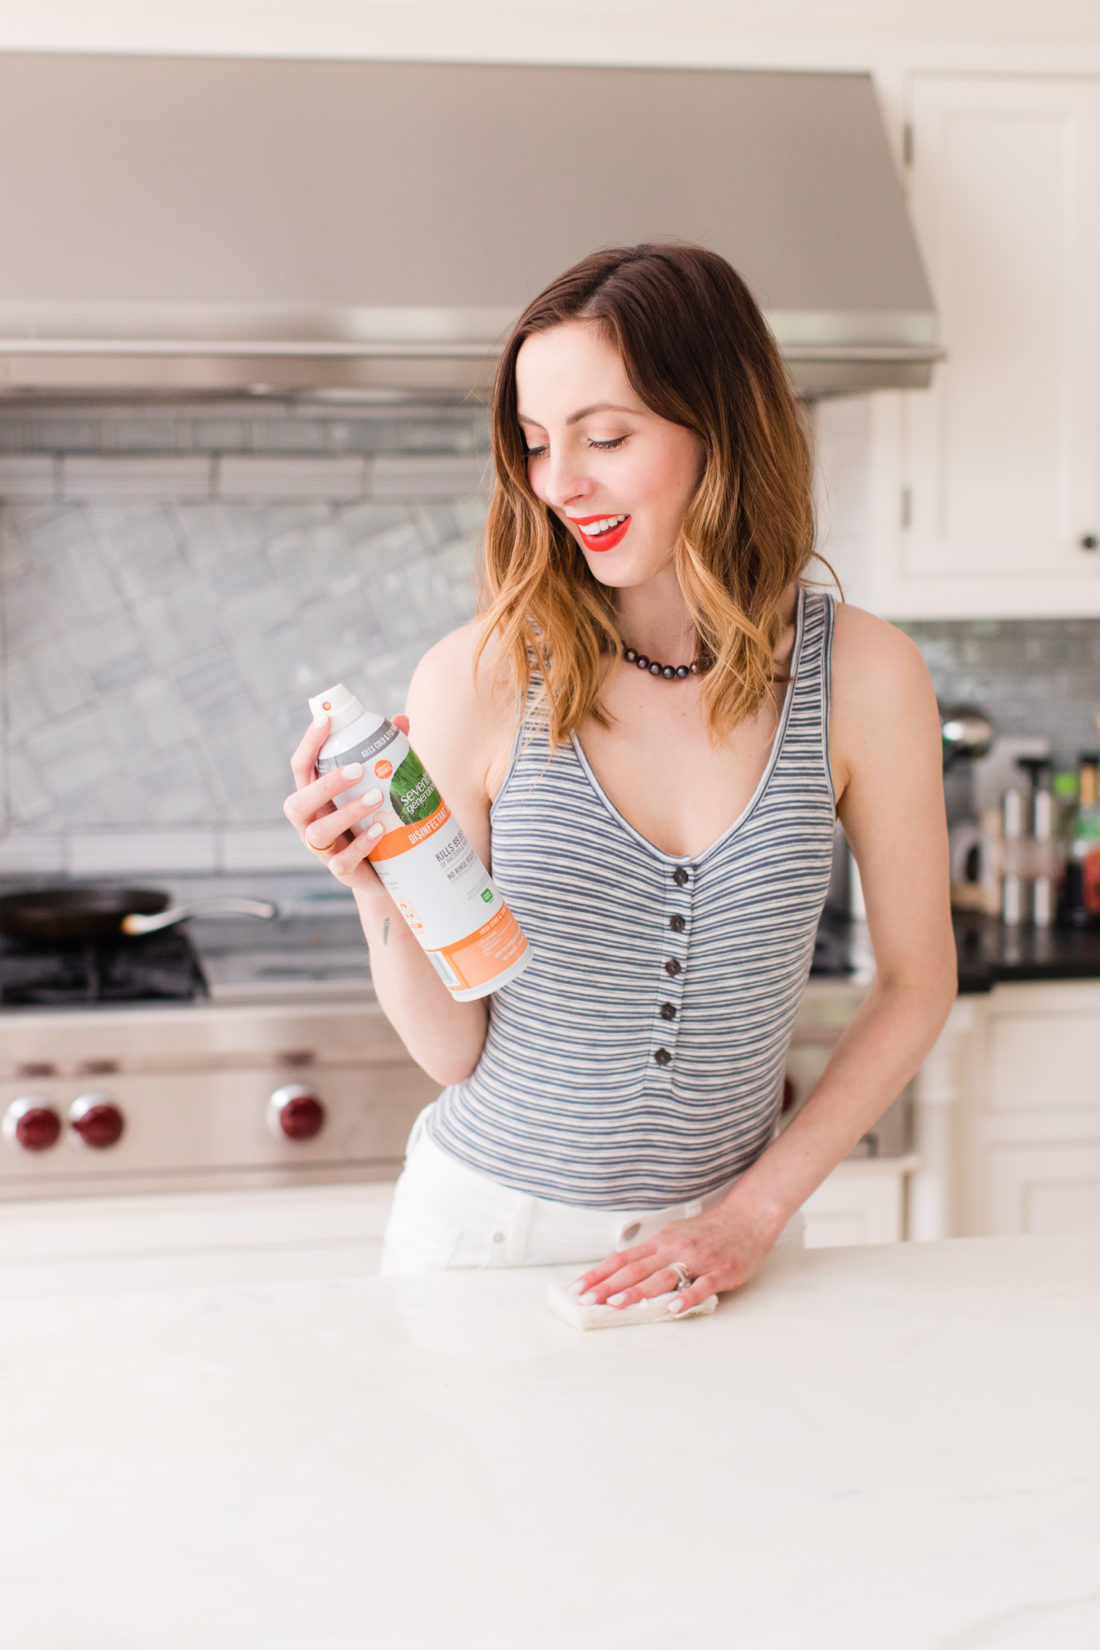 Eva Amurri Martino wears a striped bodysuit and white jeans and cleans her connecticut kitchen with seventh generation spray